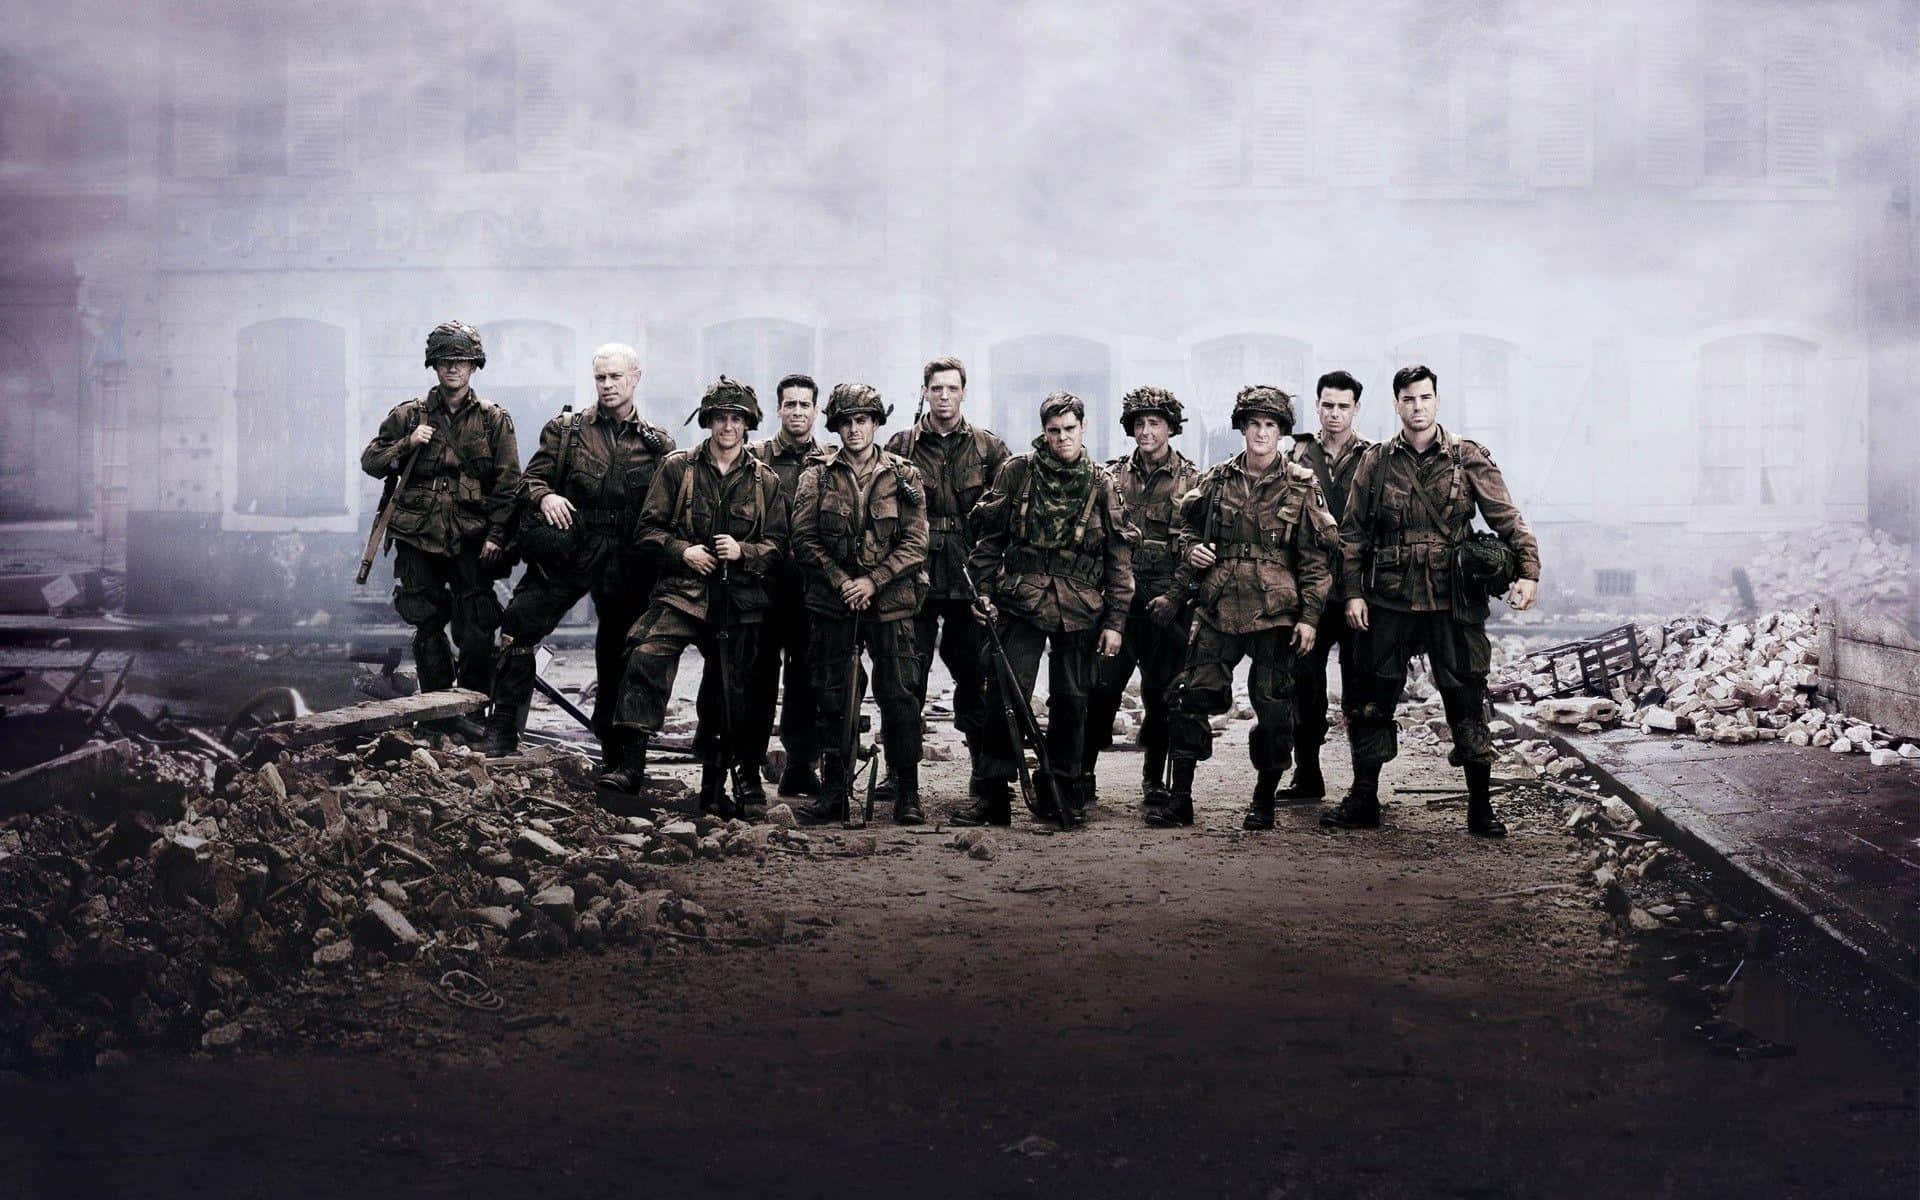 Soldiers Wearing Uniform Group Photo Wallpaper